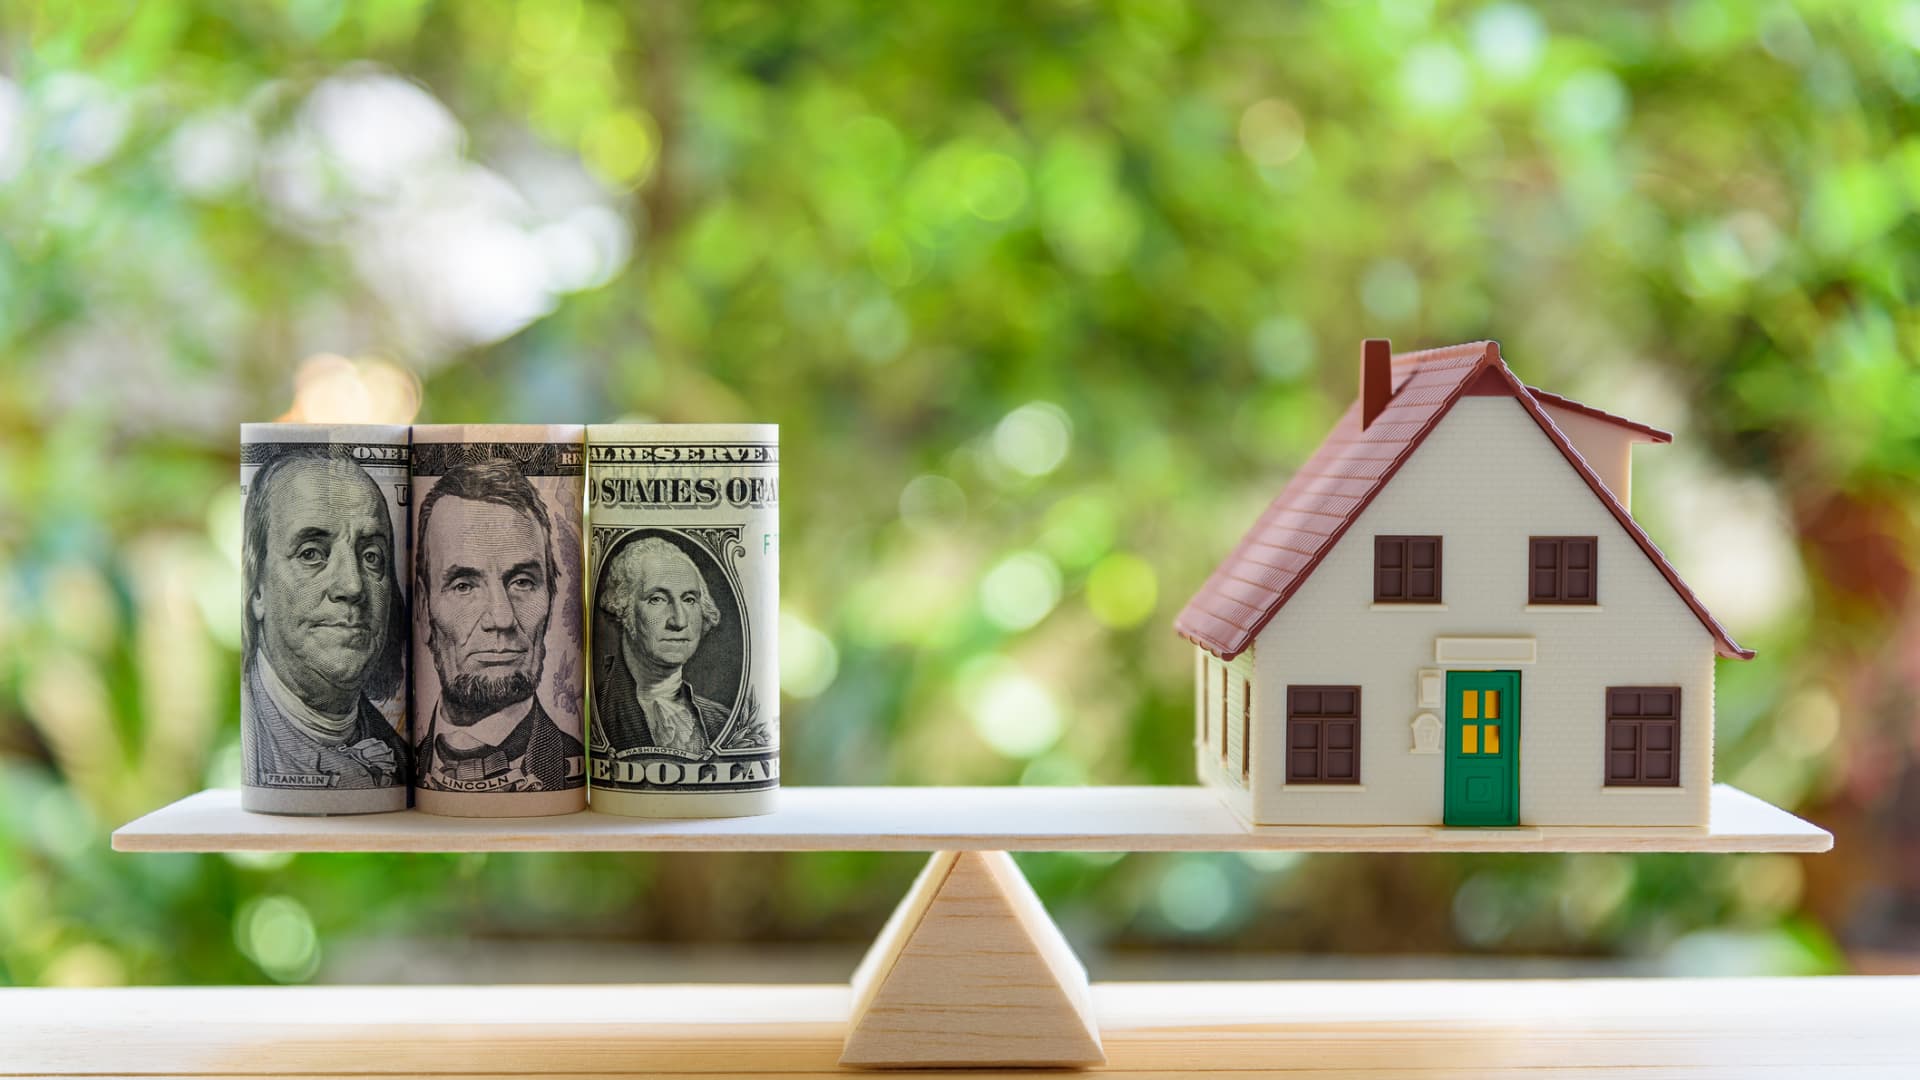 Here's what you need to know about reverse mortgages